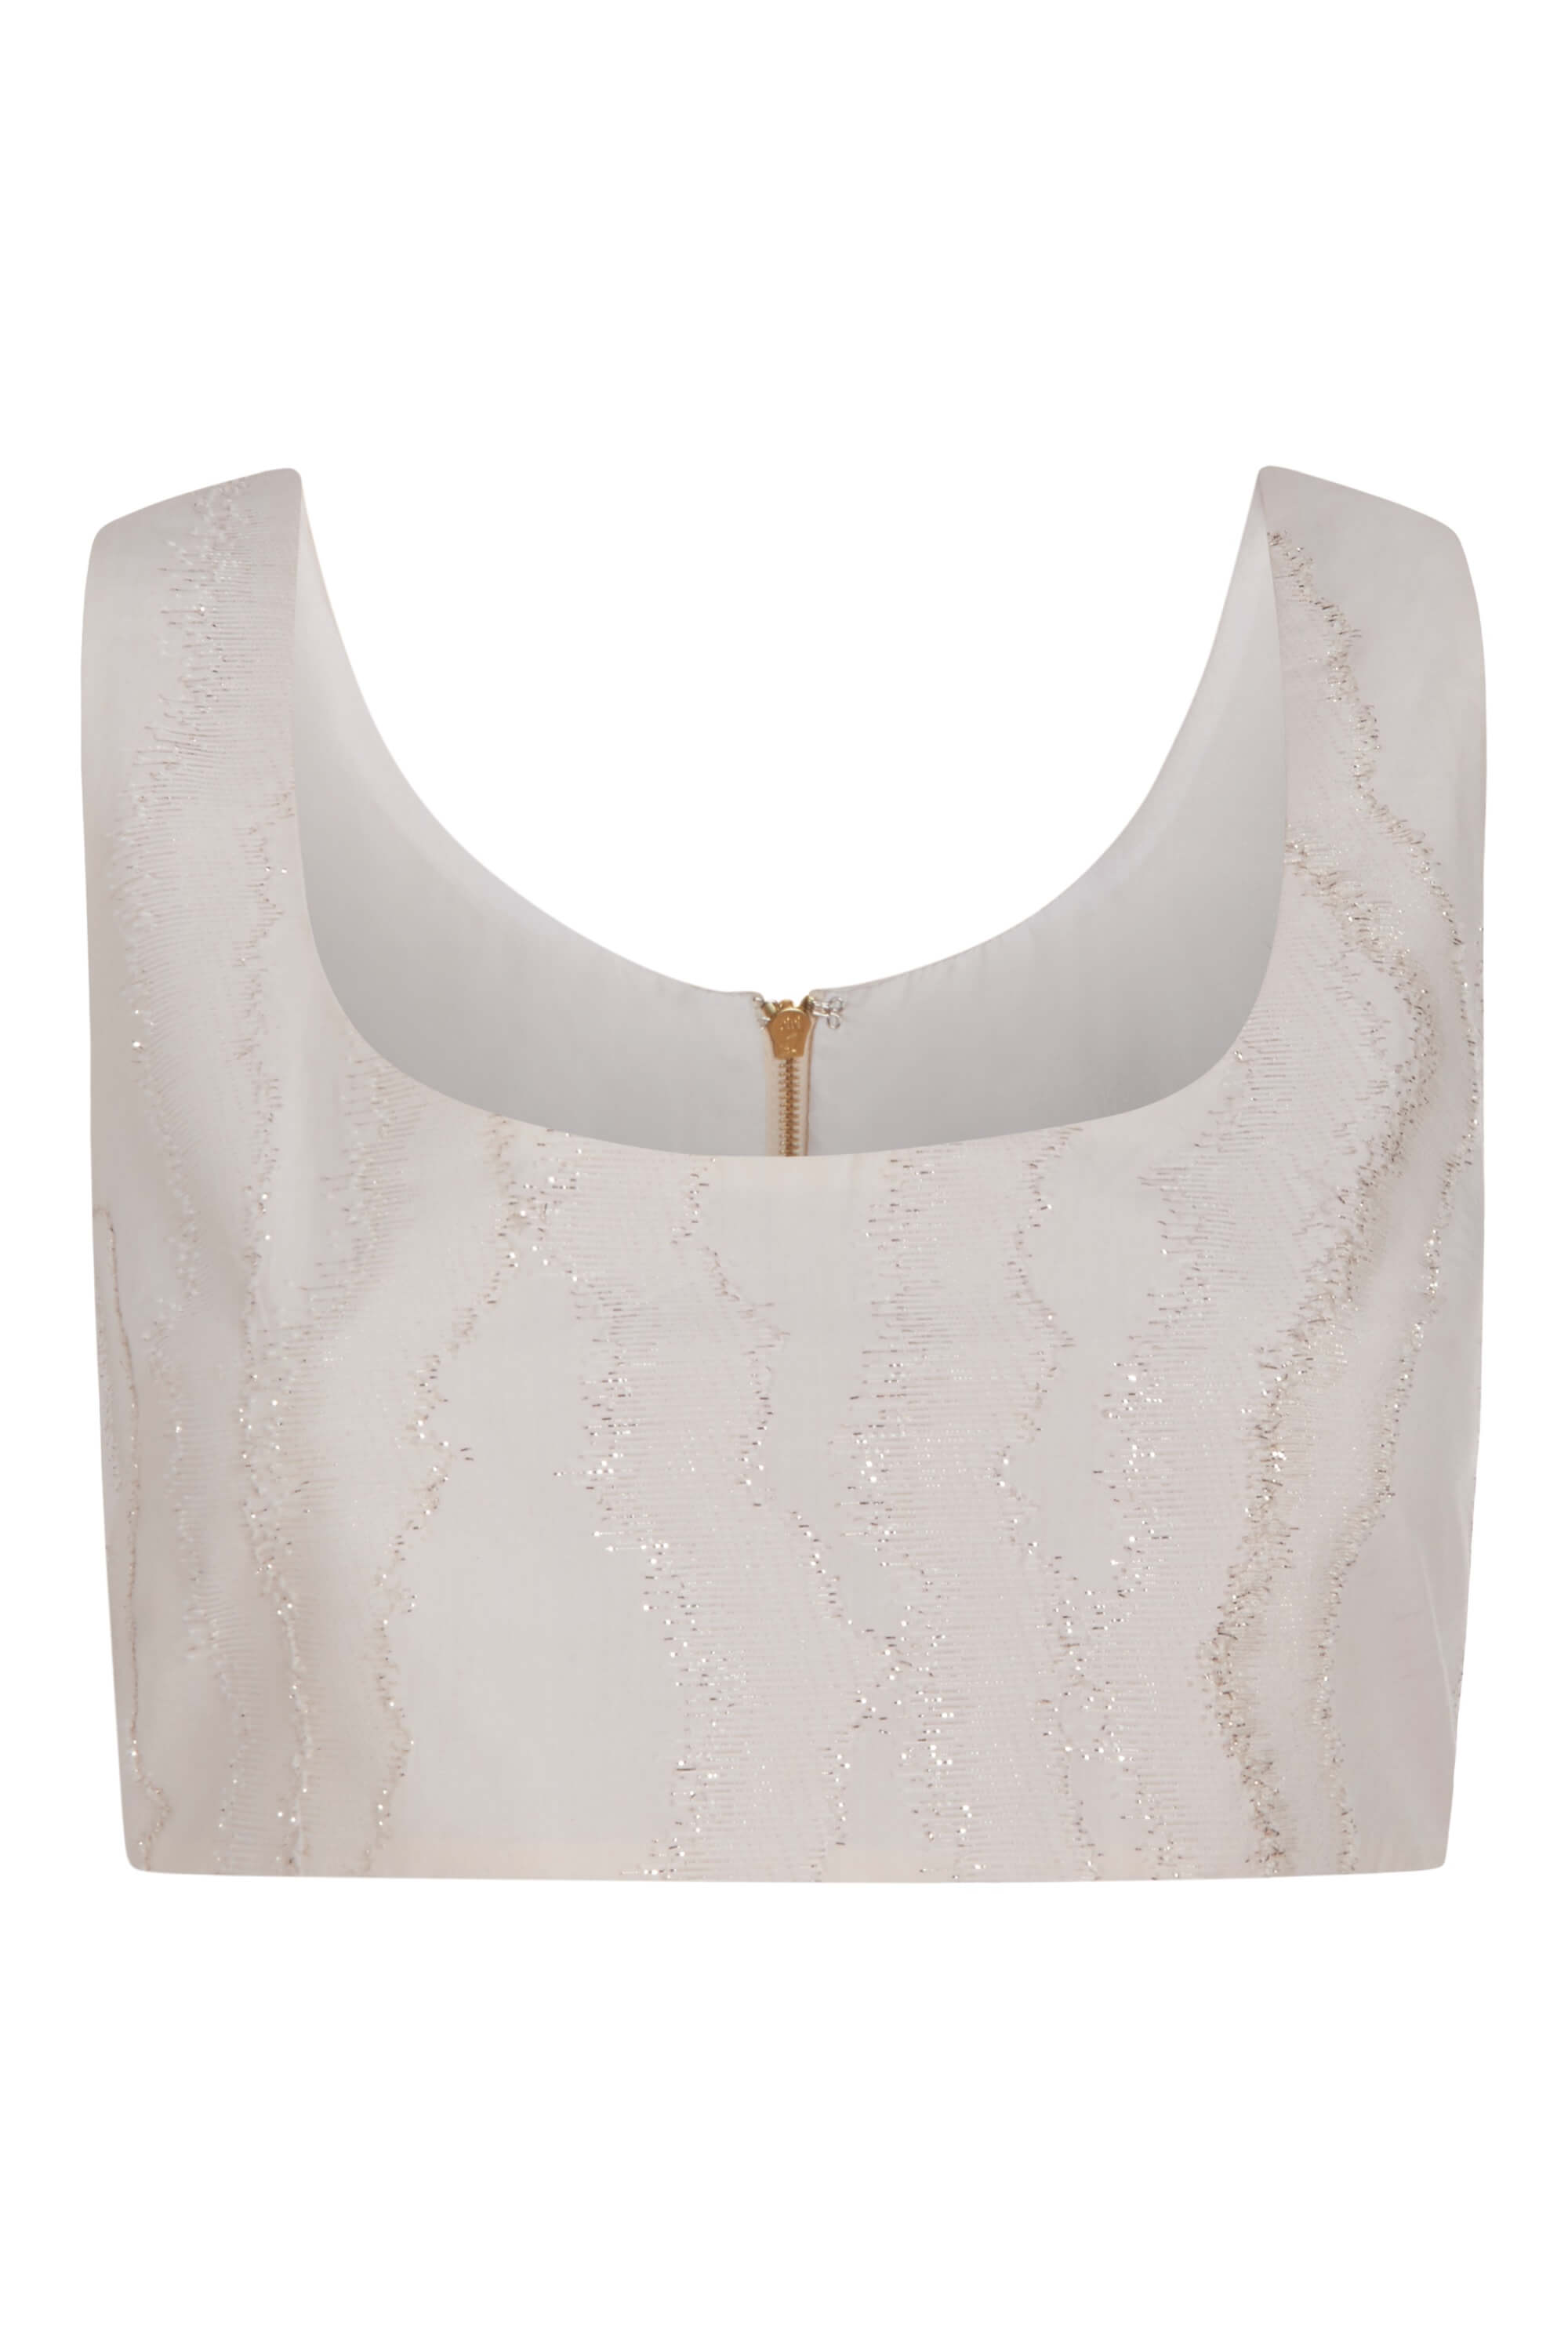 Ivory Rose Fuller Bust crop top with support and high waist shorts